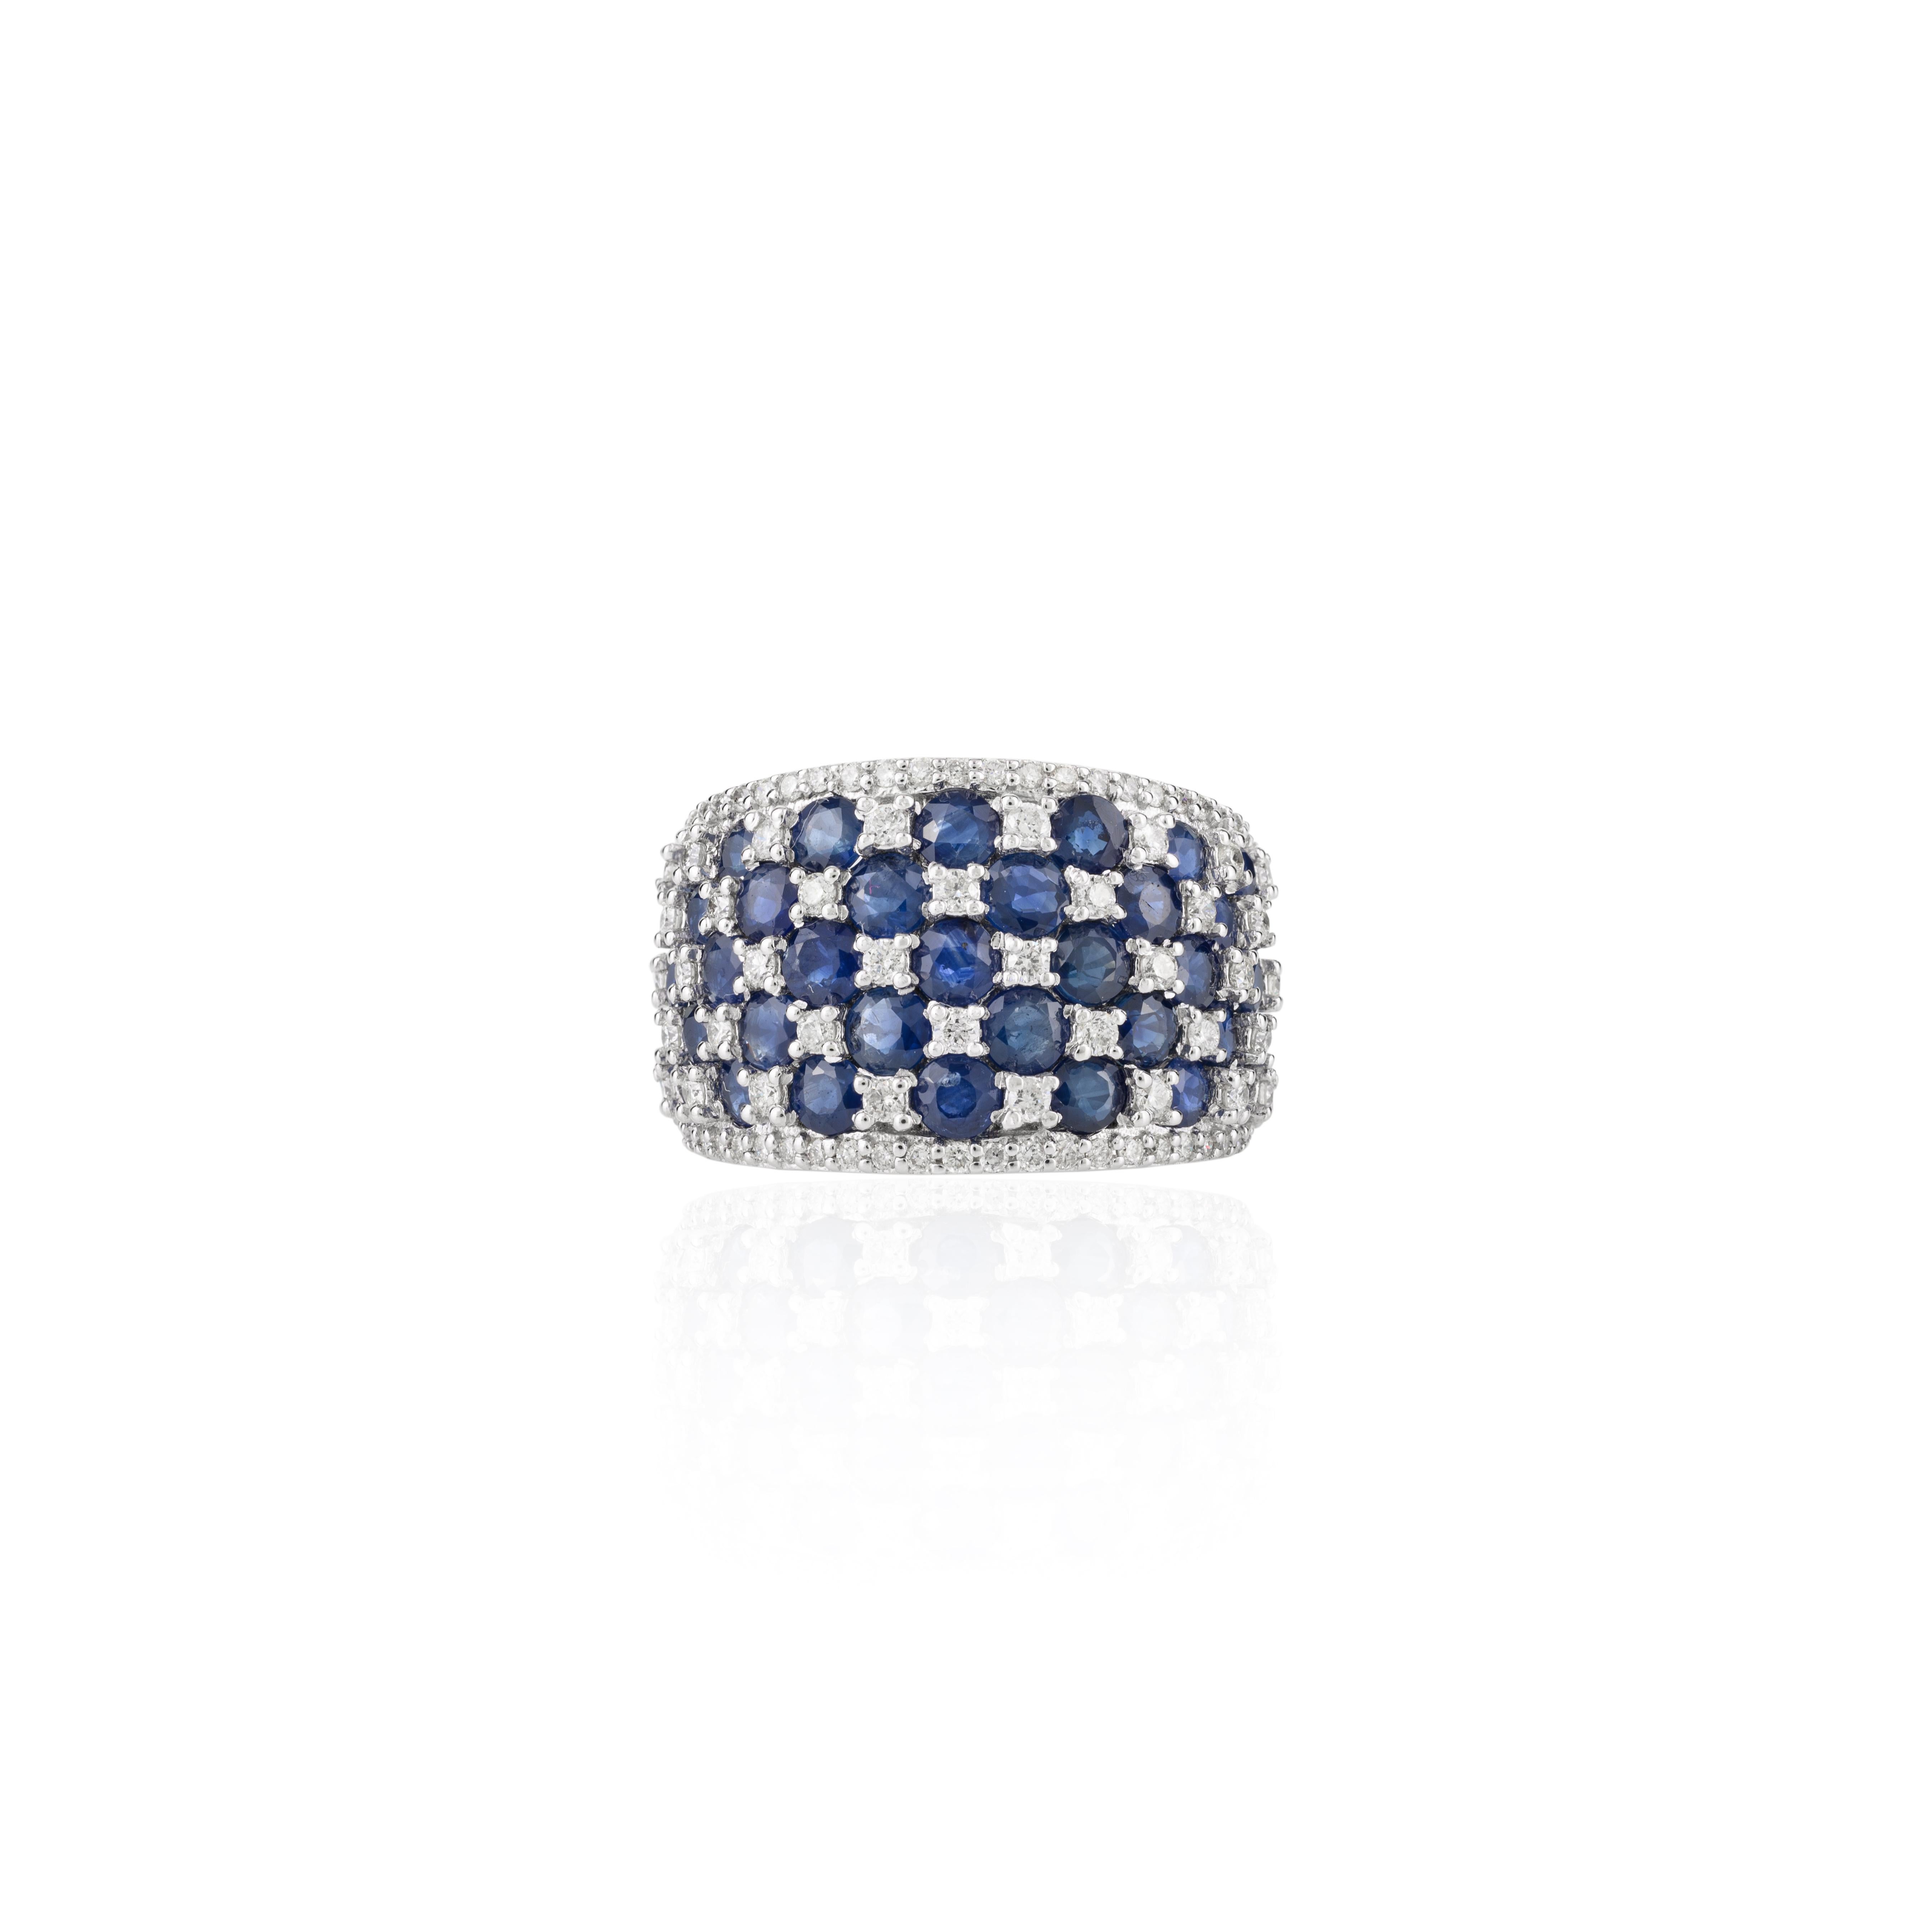 For Sale:  Stunning 4.11 CTW Sapphire Diamond Wide Cocktail Band Ring in 18k White Gold 5